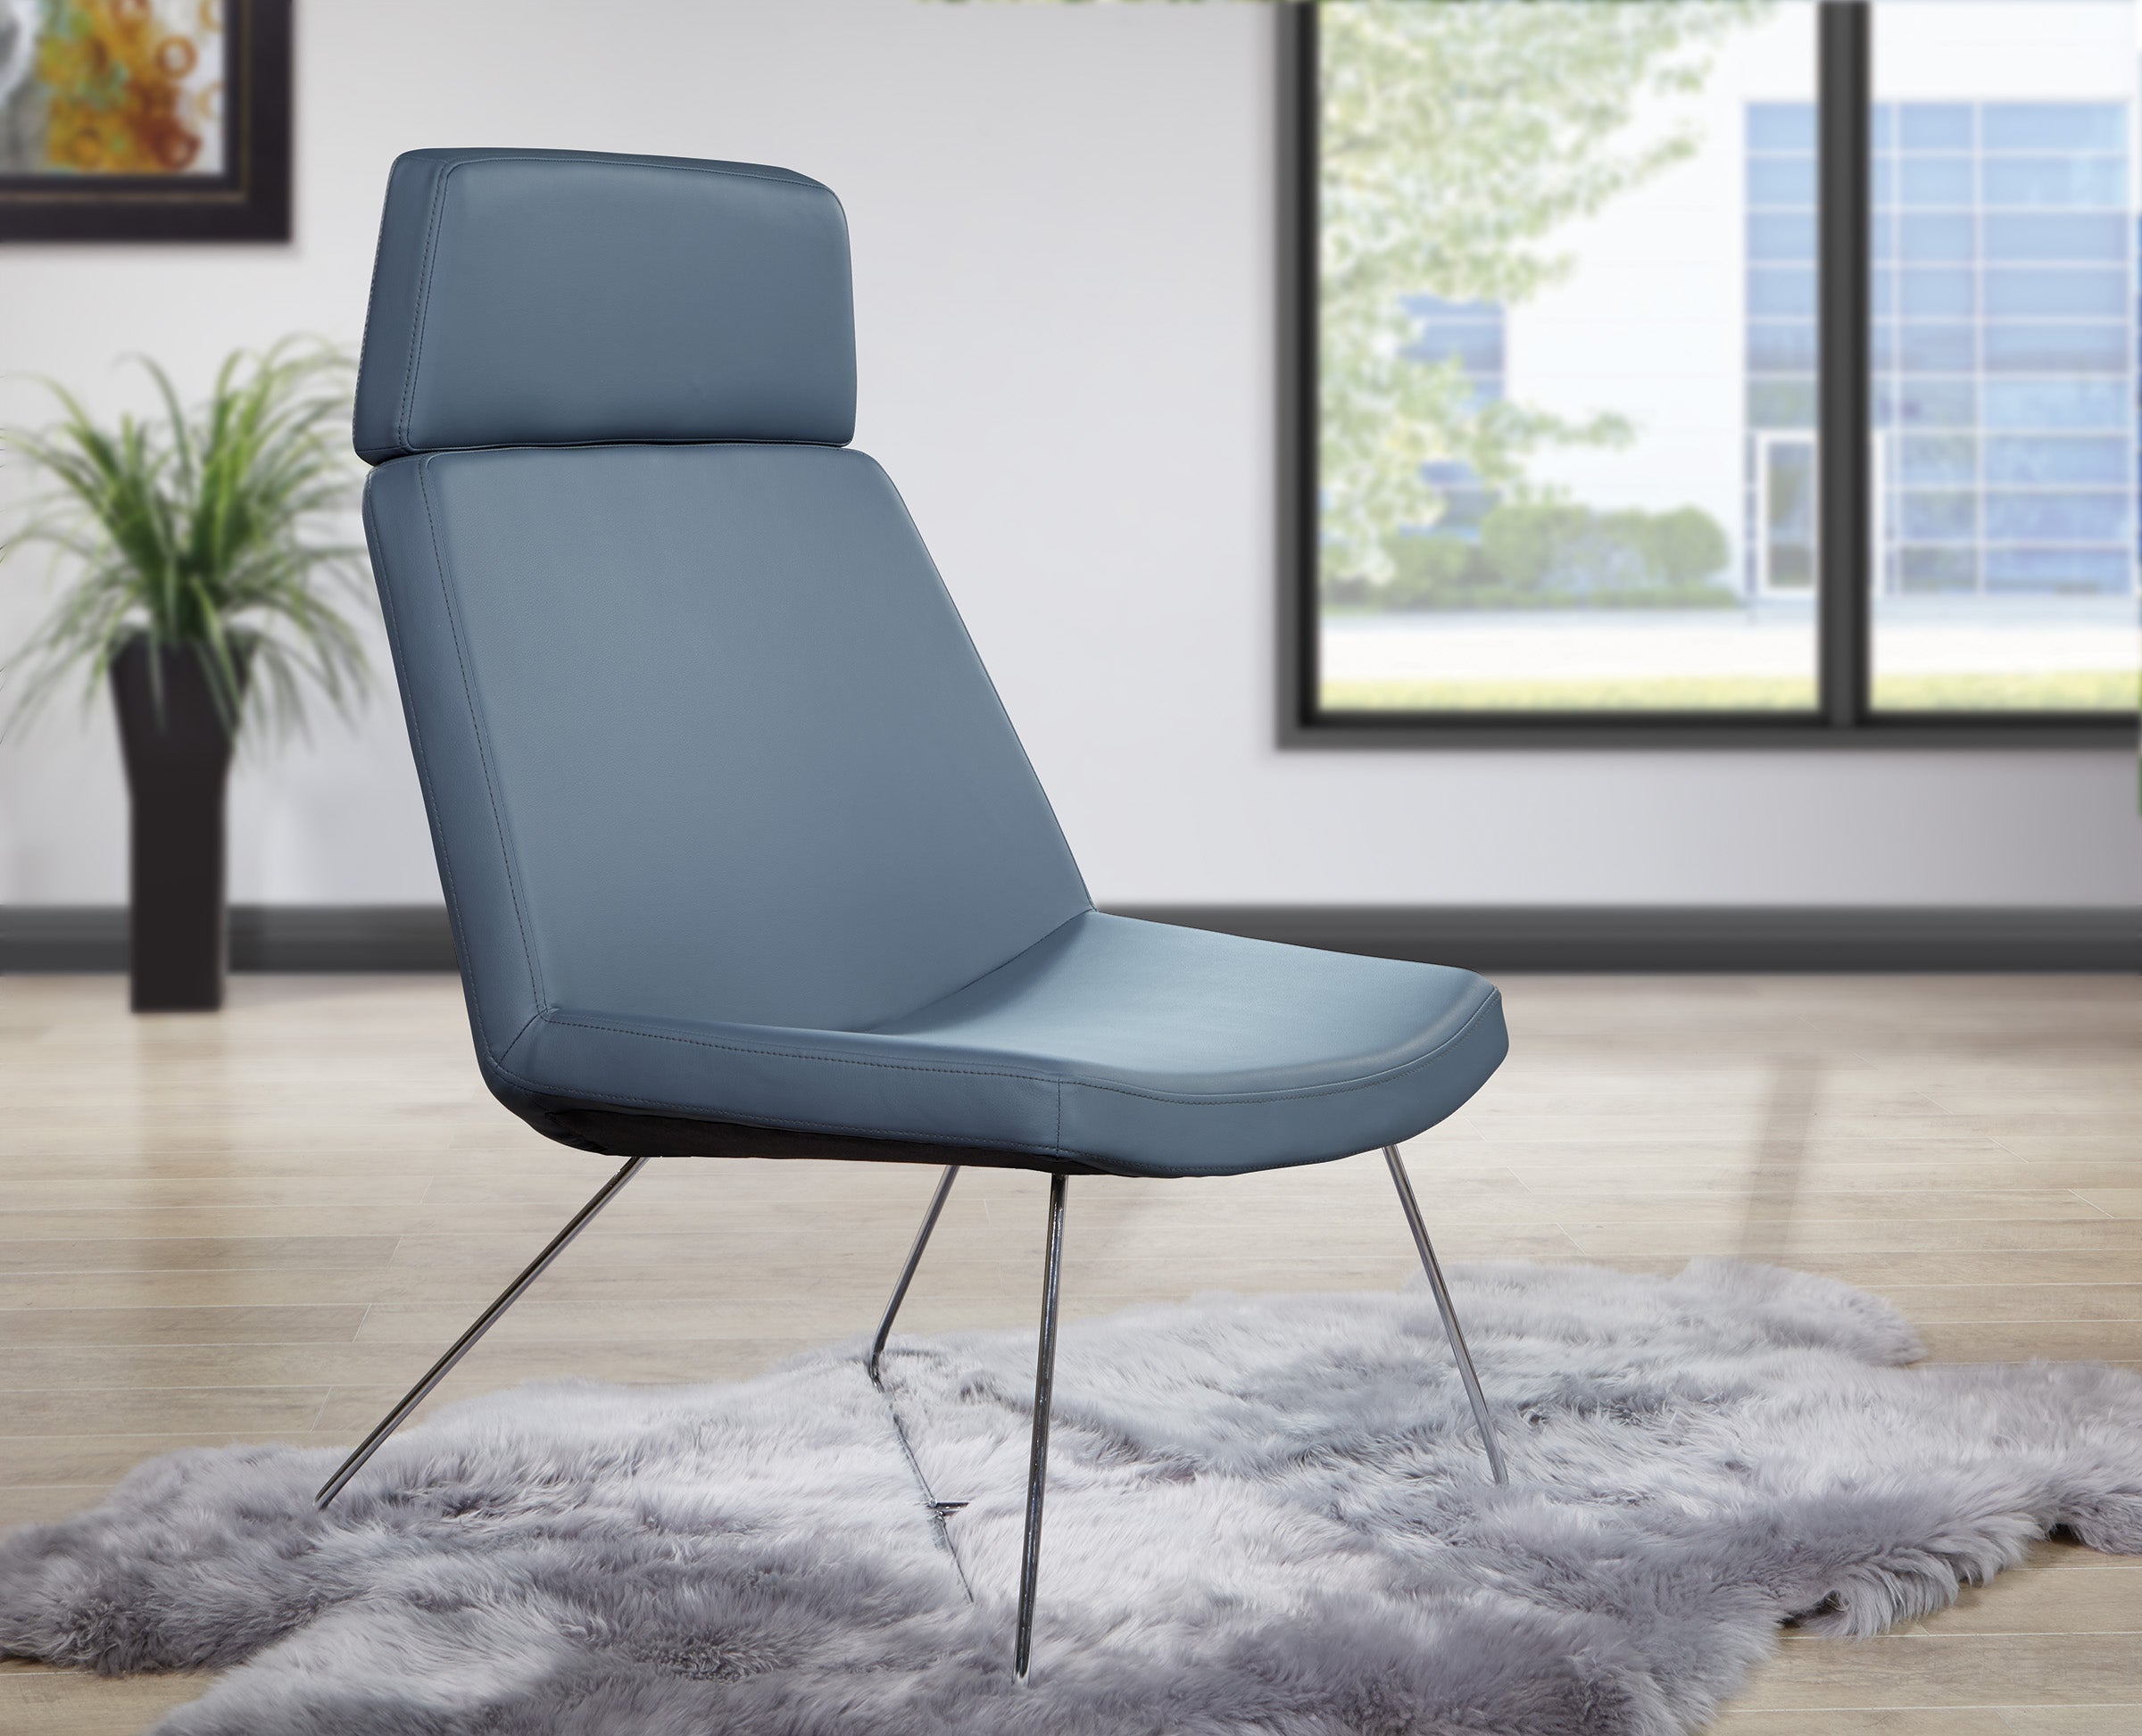 GNA50400 - Modern Geena Guest Lounge Chair in Dillon Antimicrobial by OSP